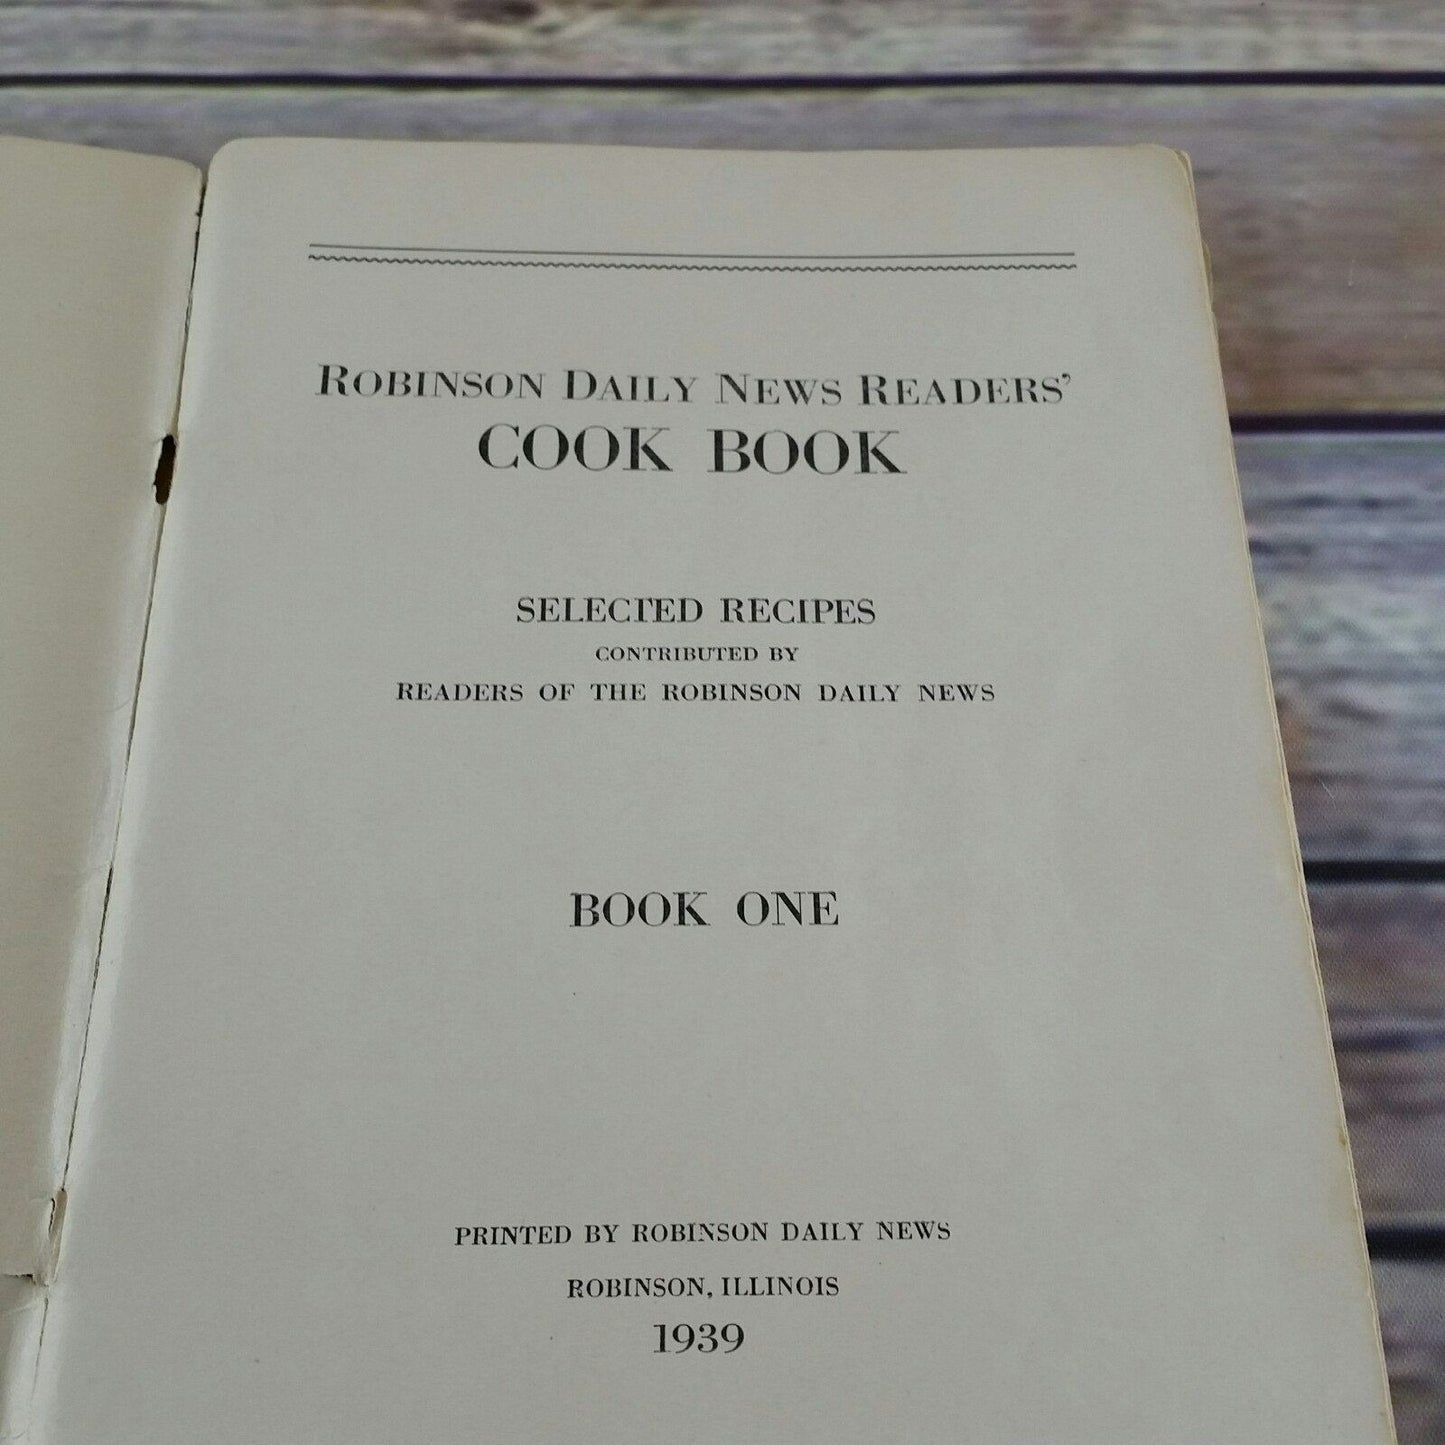 Vintage Illinois Cookbook Robinson Daily News Readers' Cook Book Recipes 1939 Paperback Booklet Robinson Illinois Recipes from Readers